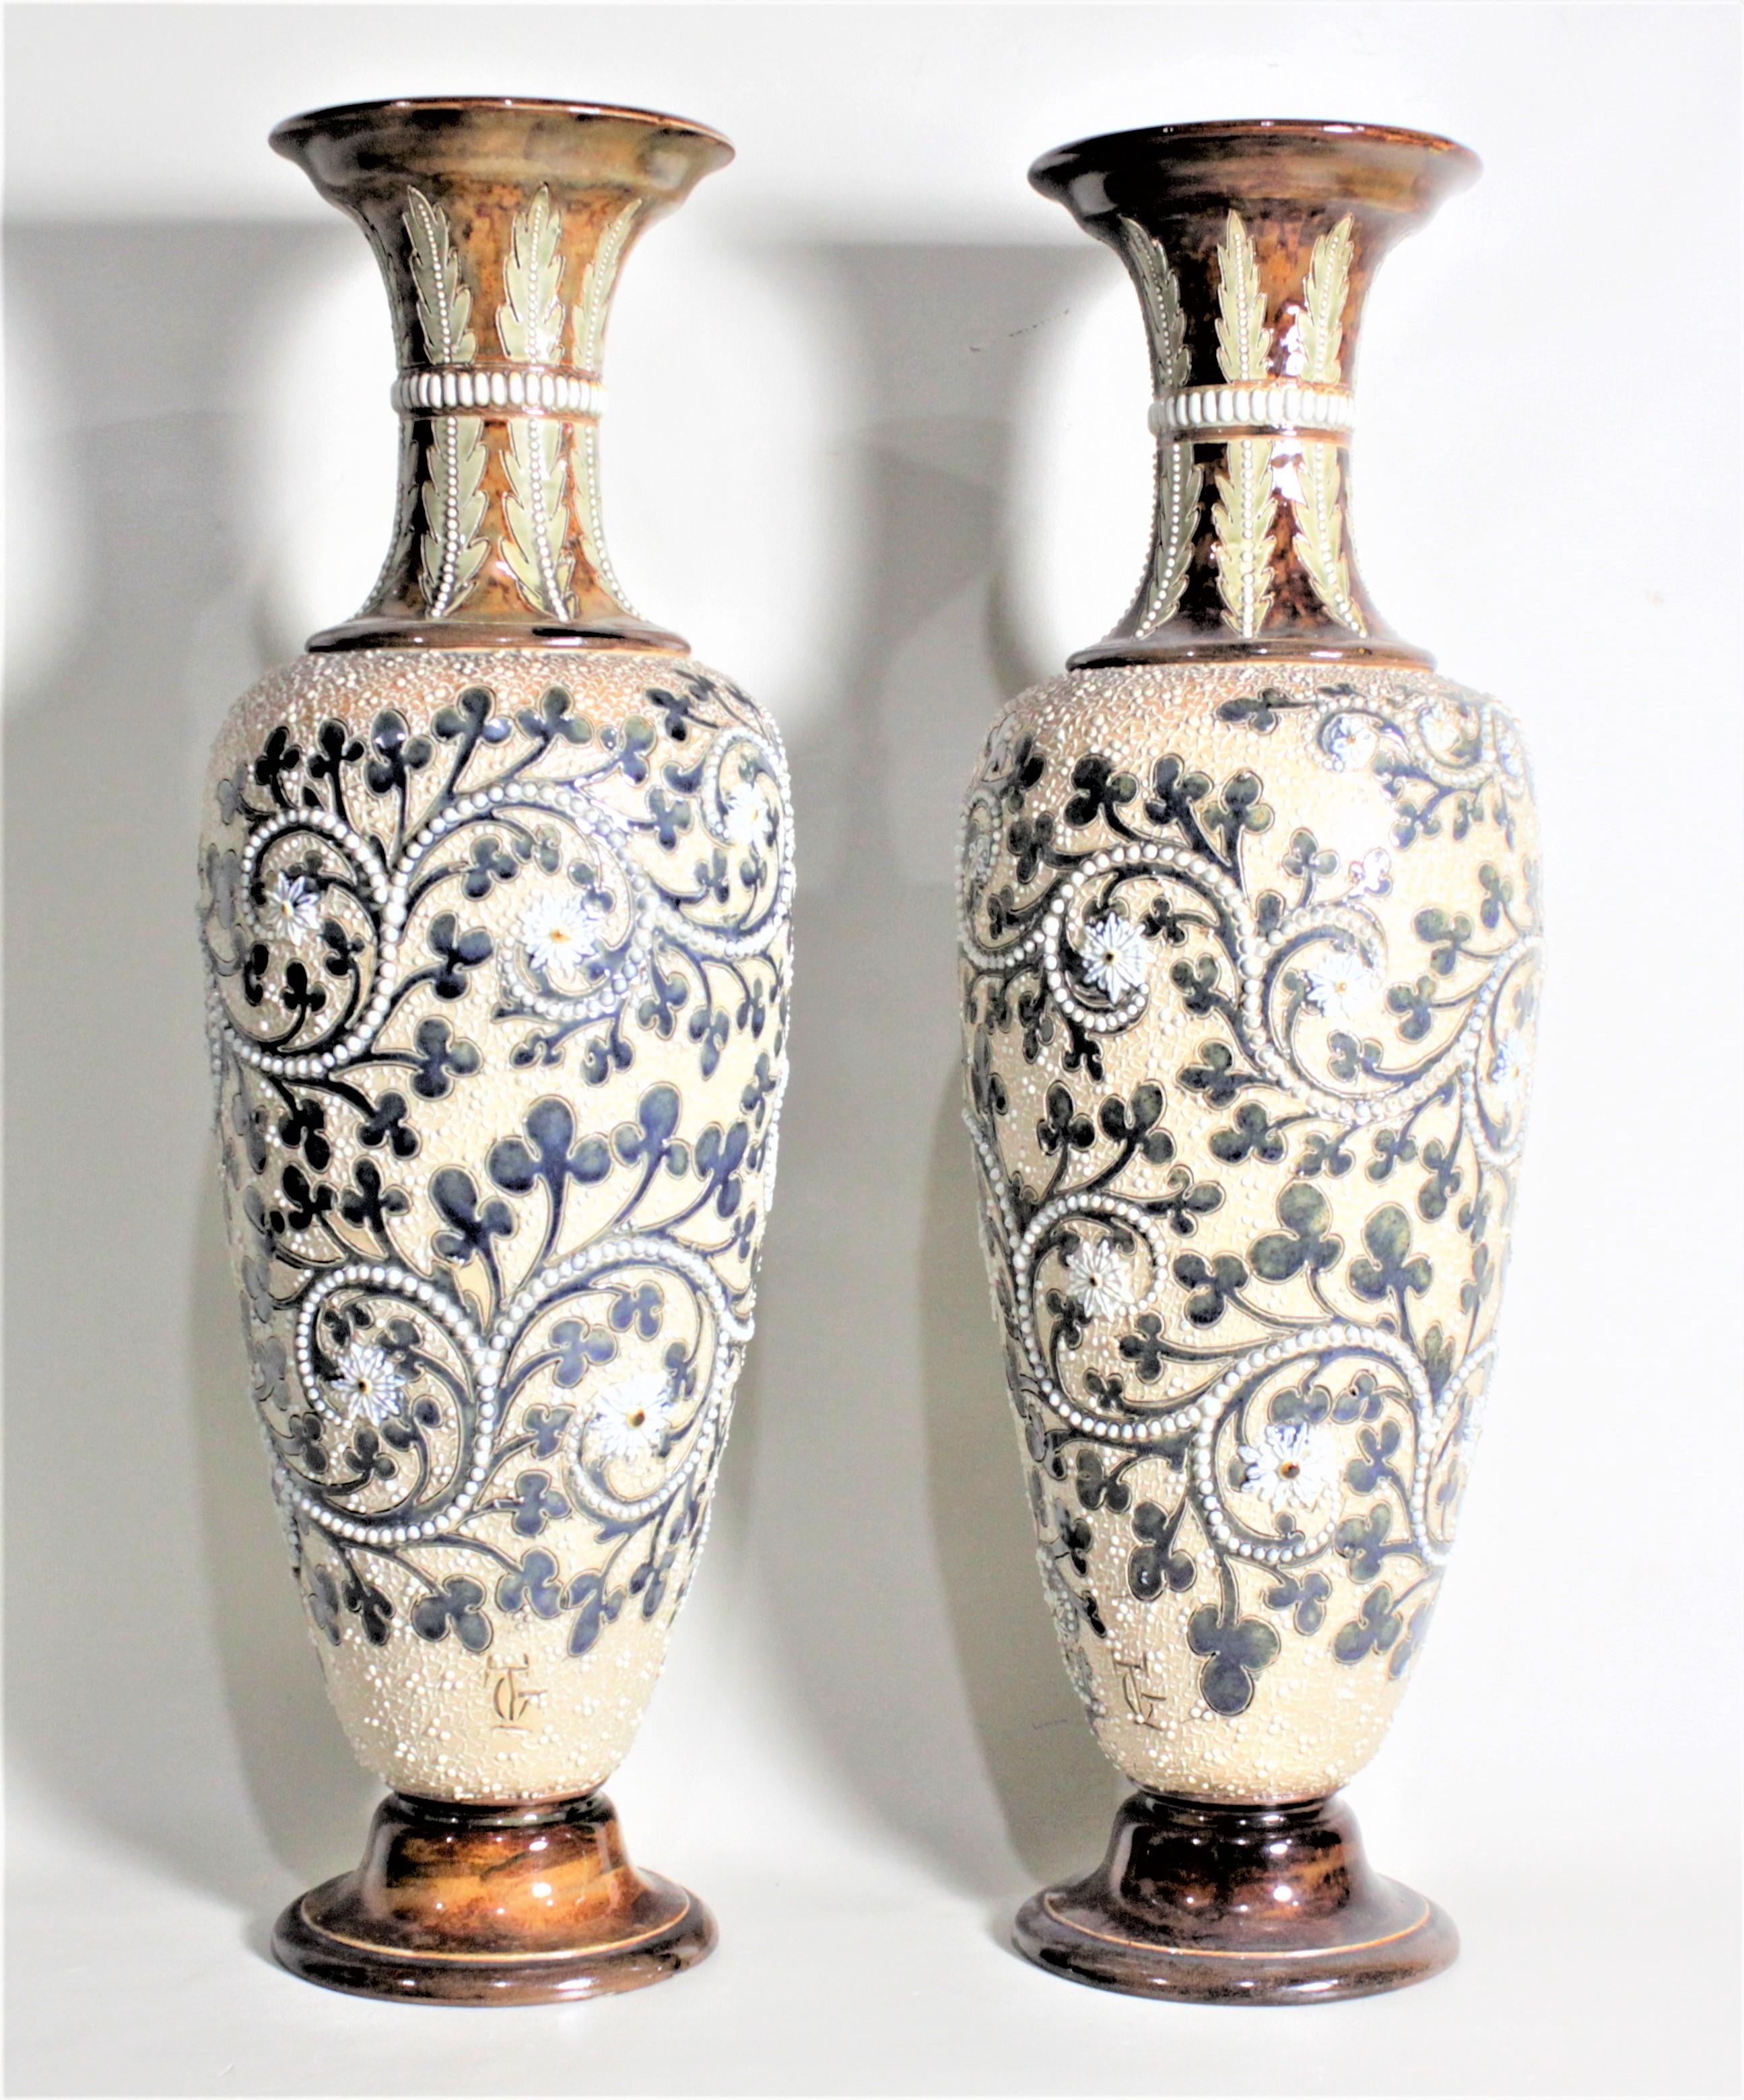 This pair of antique stoneware vases were done by the renowned potter, George Tinworth for the Doulton Lambeth factory of England in approximately 1880 in the period Victorian style. The vases are done with a deep cream ground with elaborate beaded